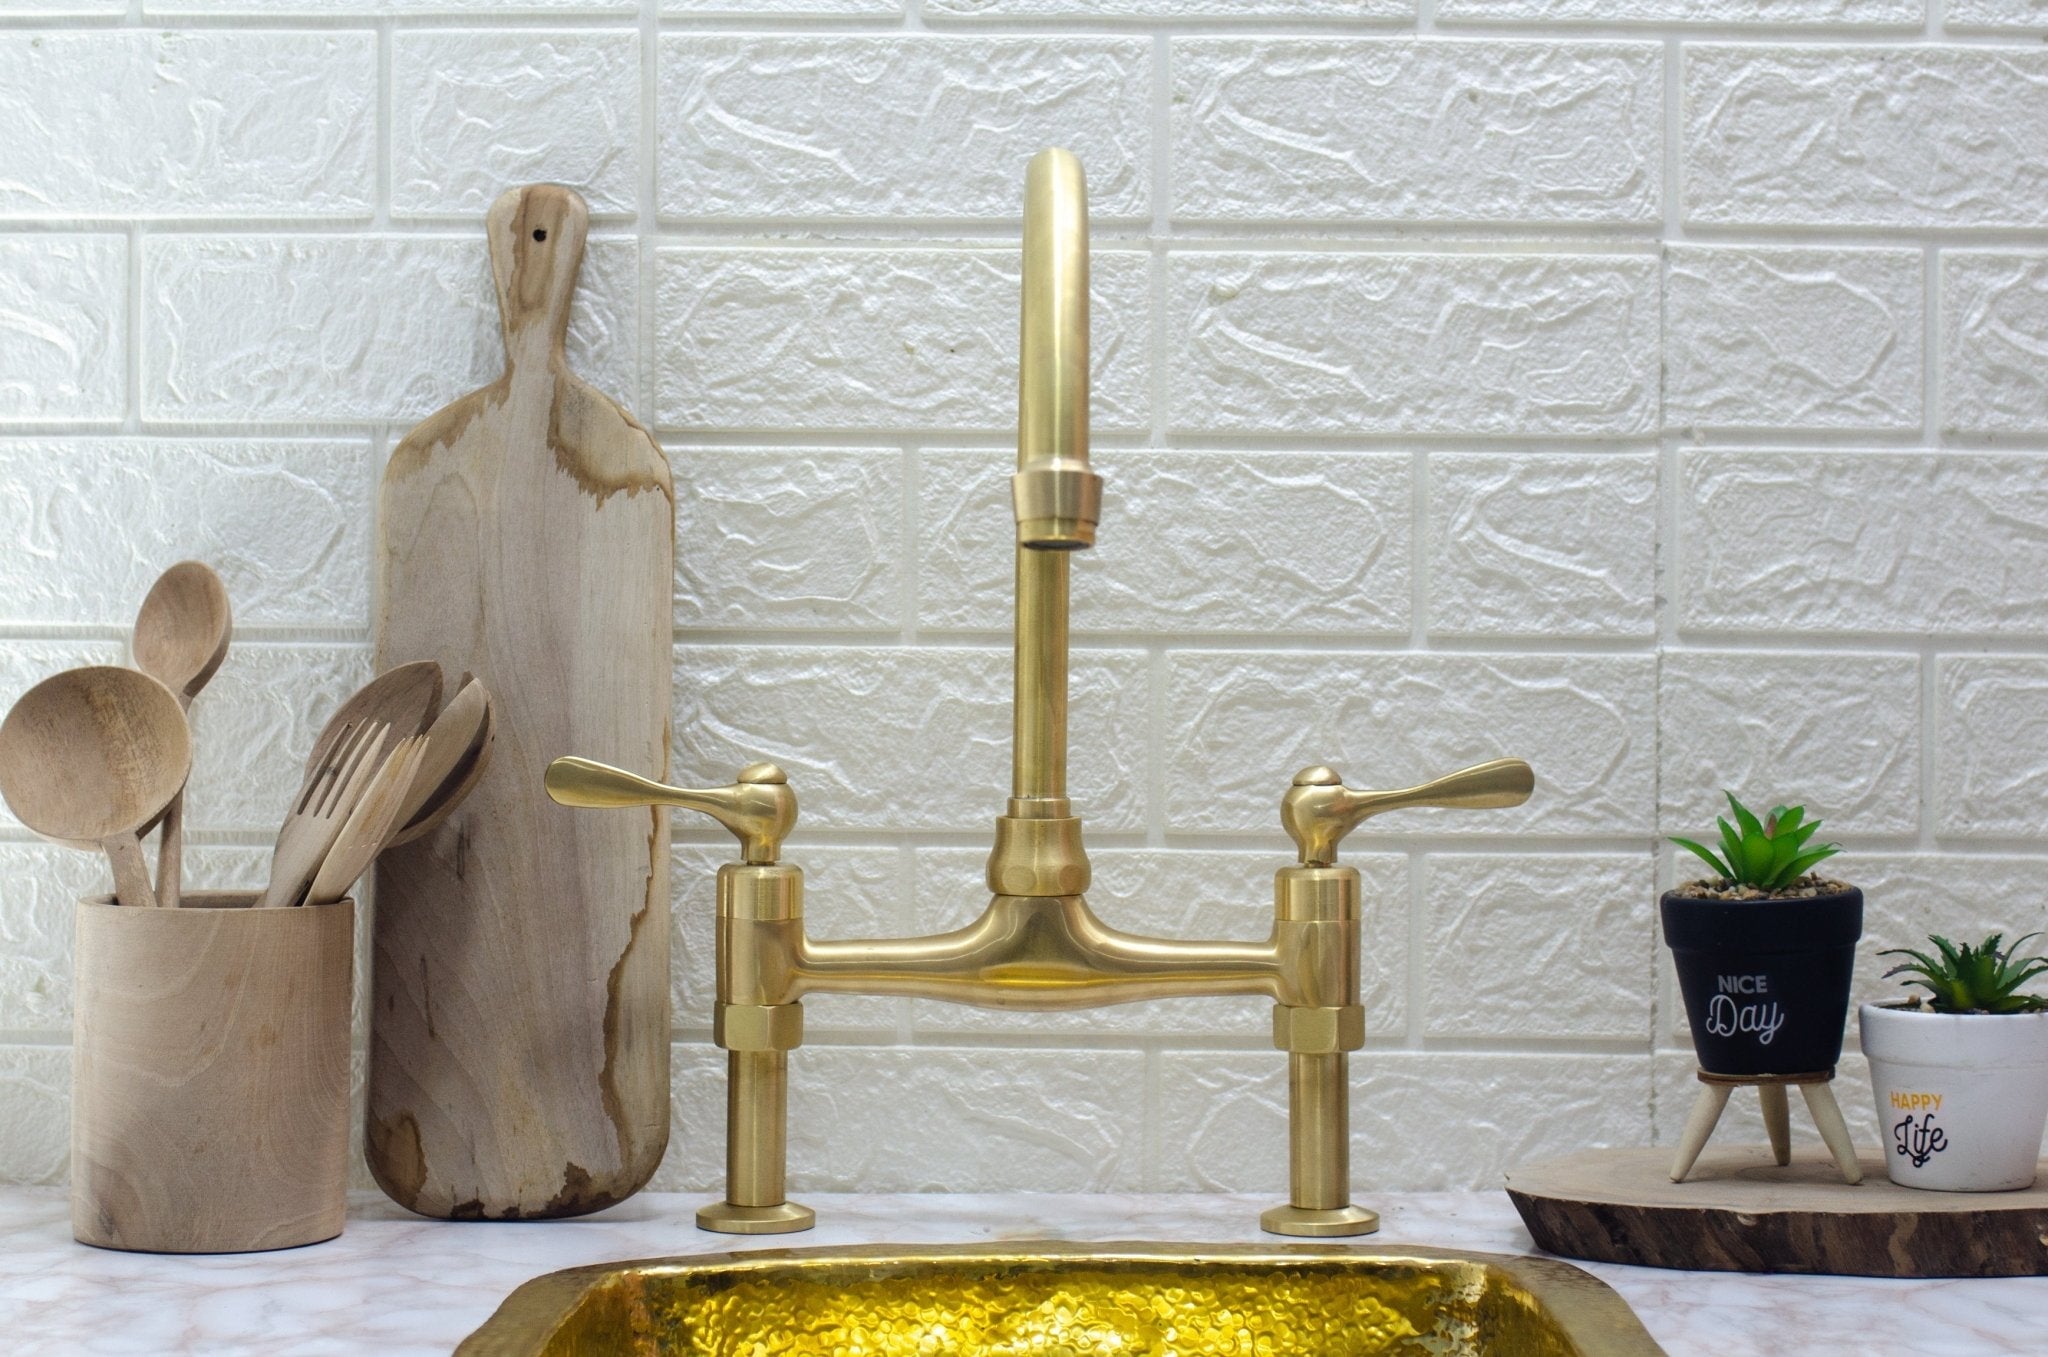 8" Brass Bridge faucet, Unlacquered Brass straight legs Faucet with classic Lever Handles